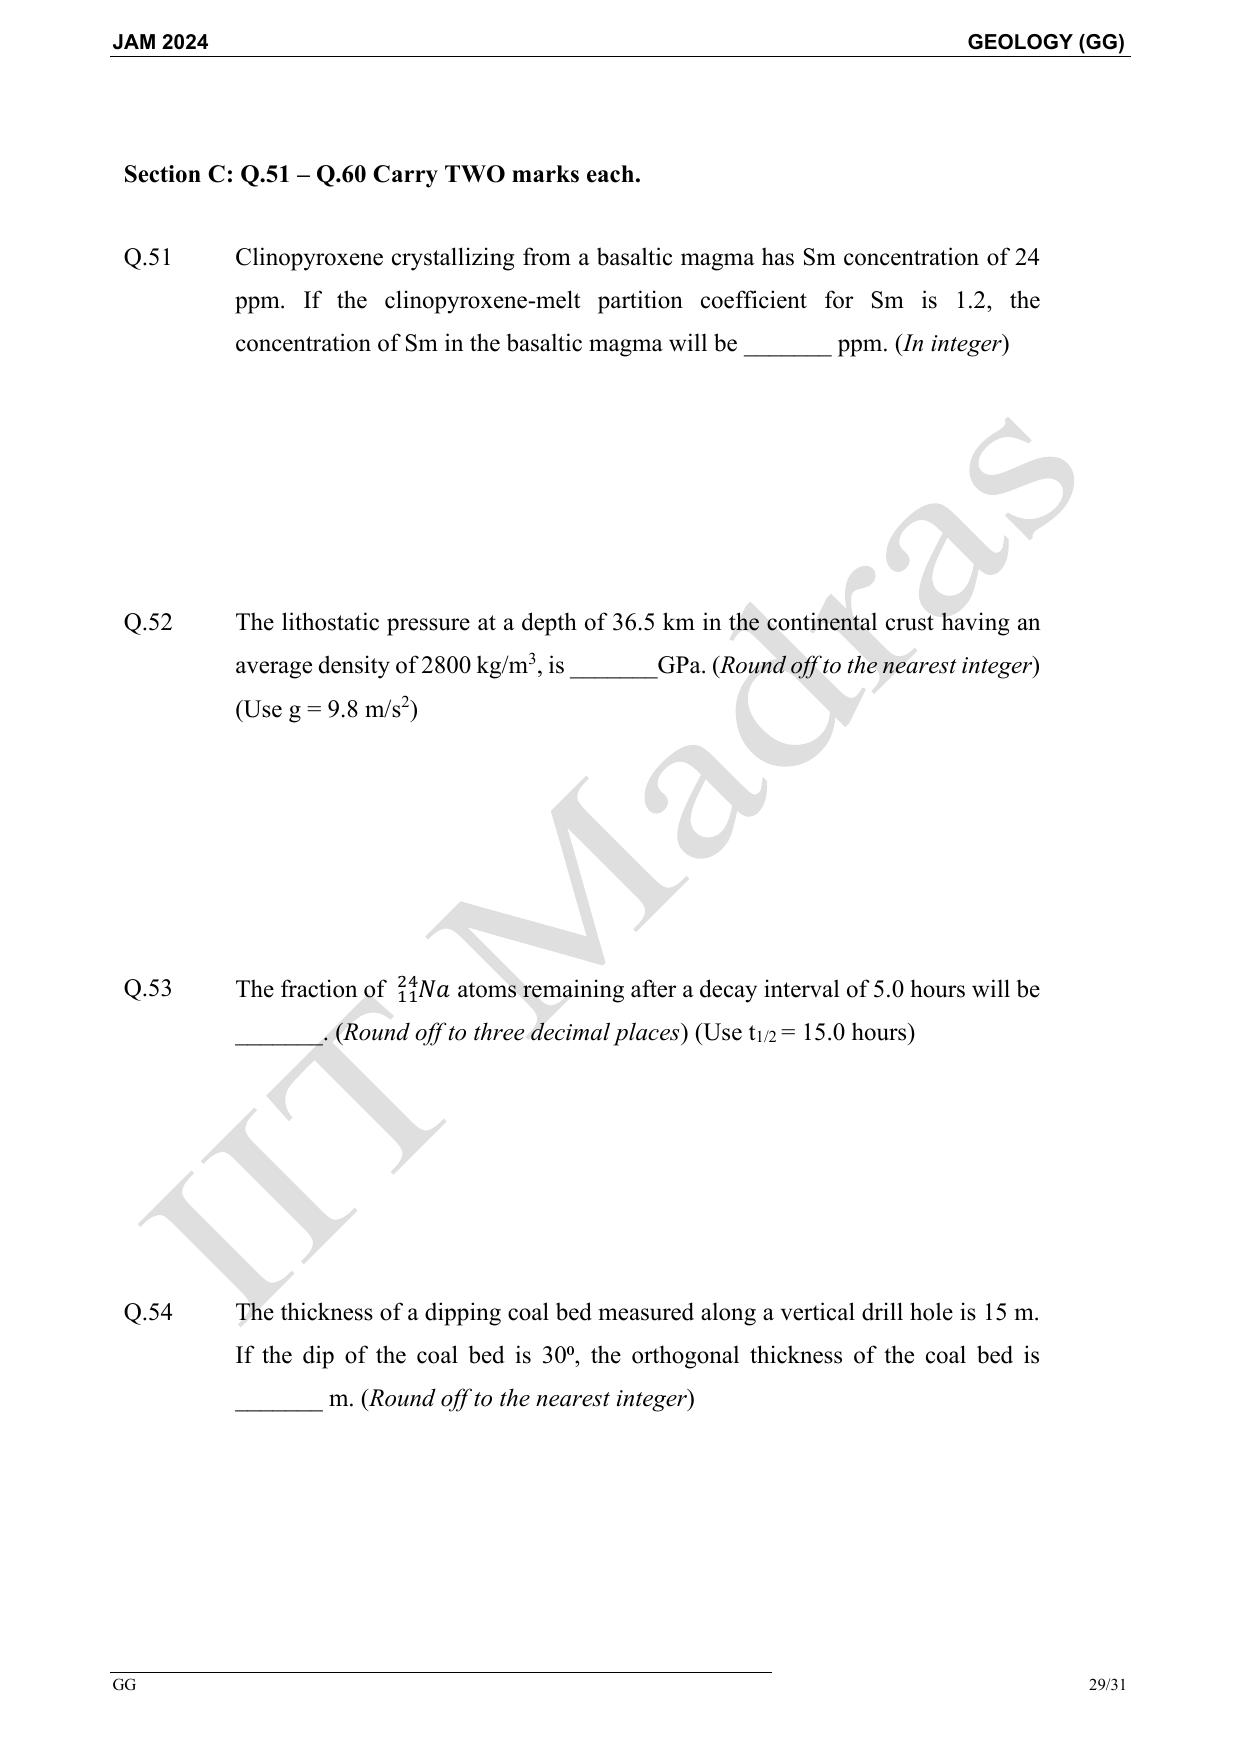 IIT JAM 2024 Geology (GG) Master Question Paper - Page 29